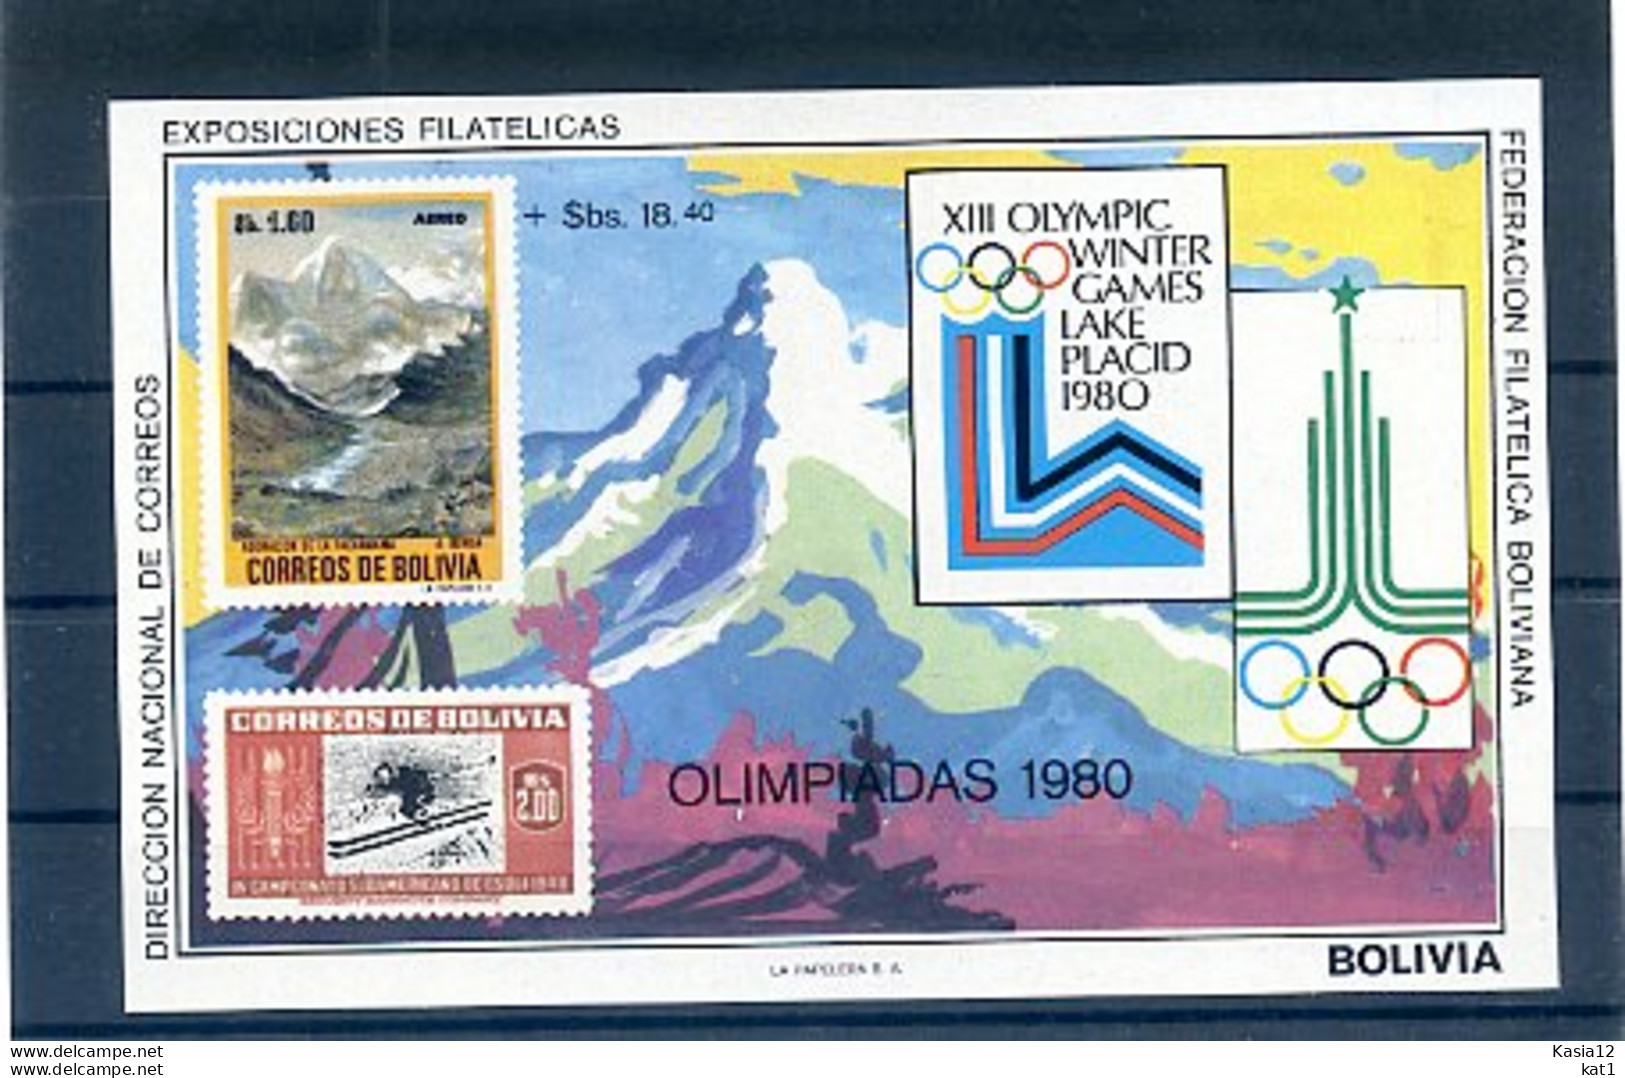 A20405)Olympia 80: Bolivien Bl 89** - Hiver 1980: Lake Placid